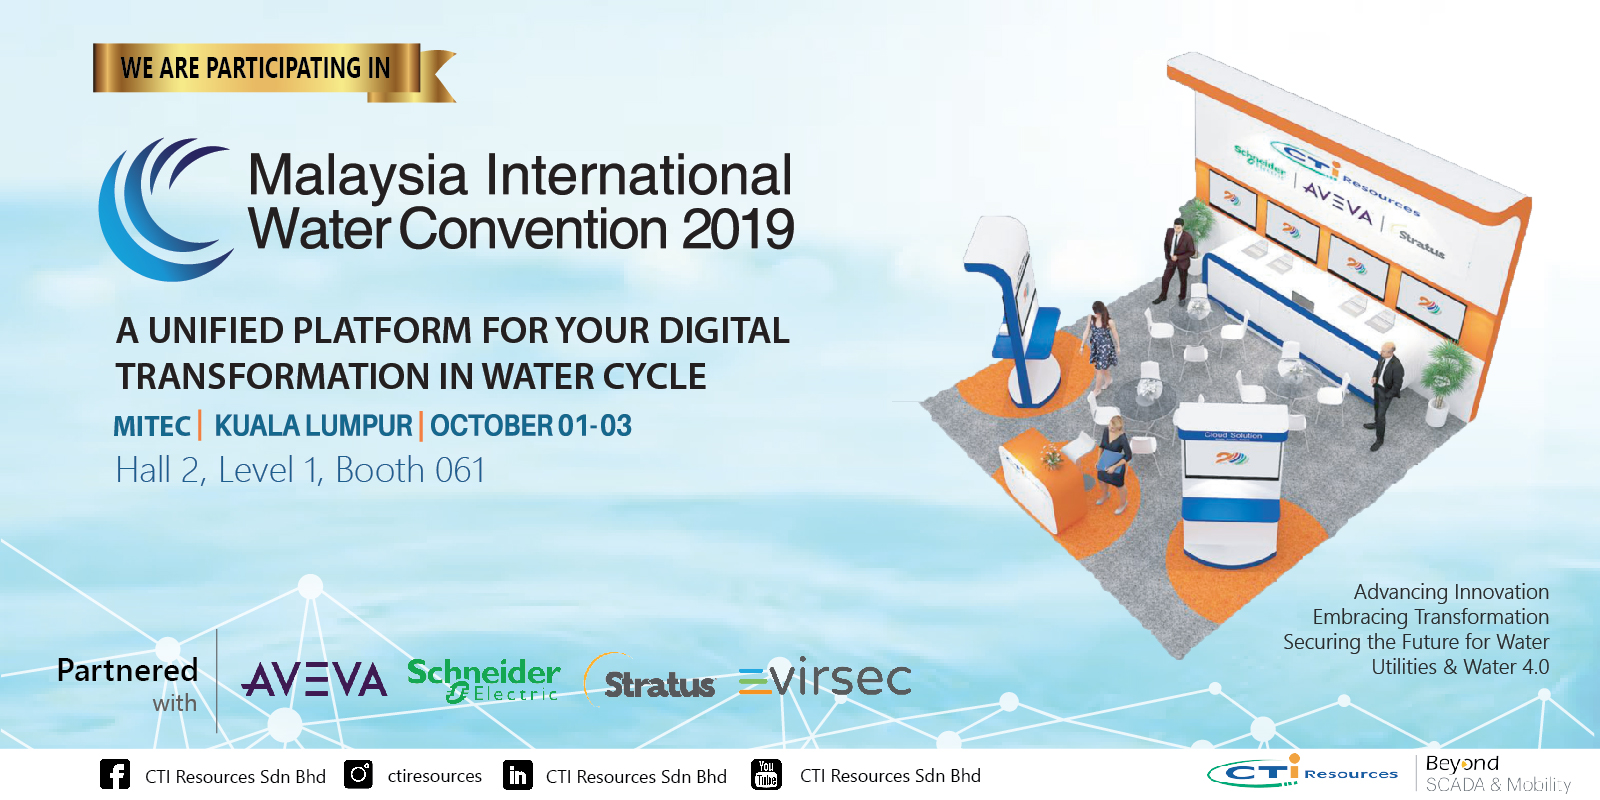 Malaysia International Water Convention (MIWC) Exhibition